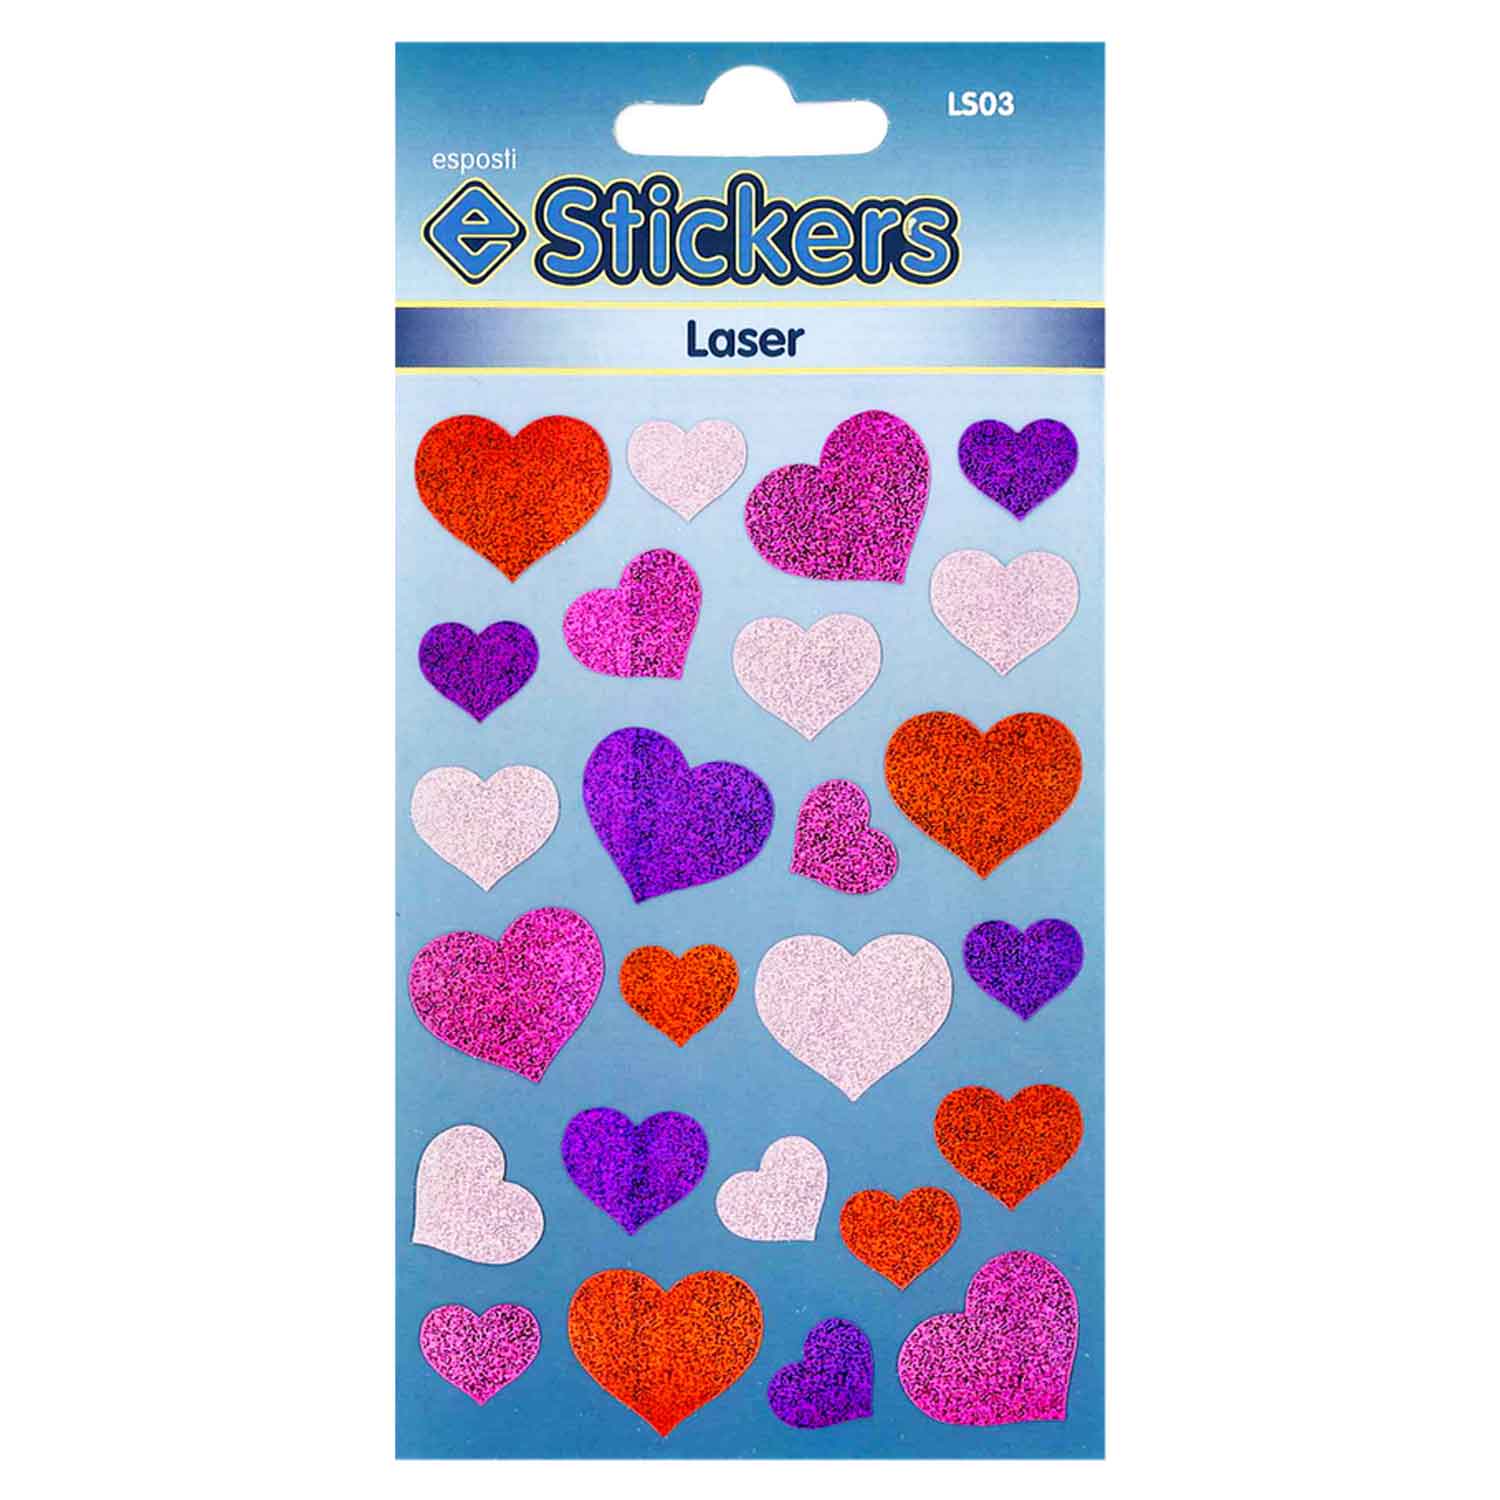 Hearts Self Adhesive Laser Novelty Stickers - Pack of 10